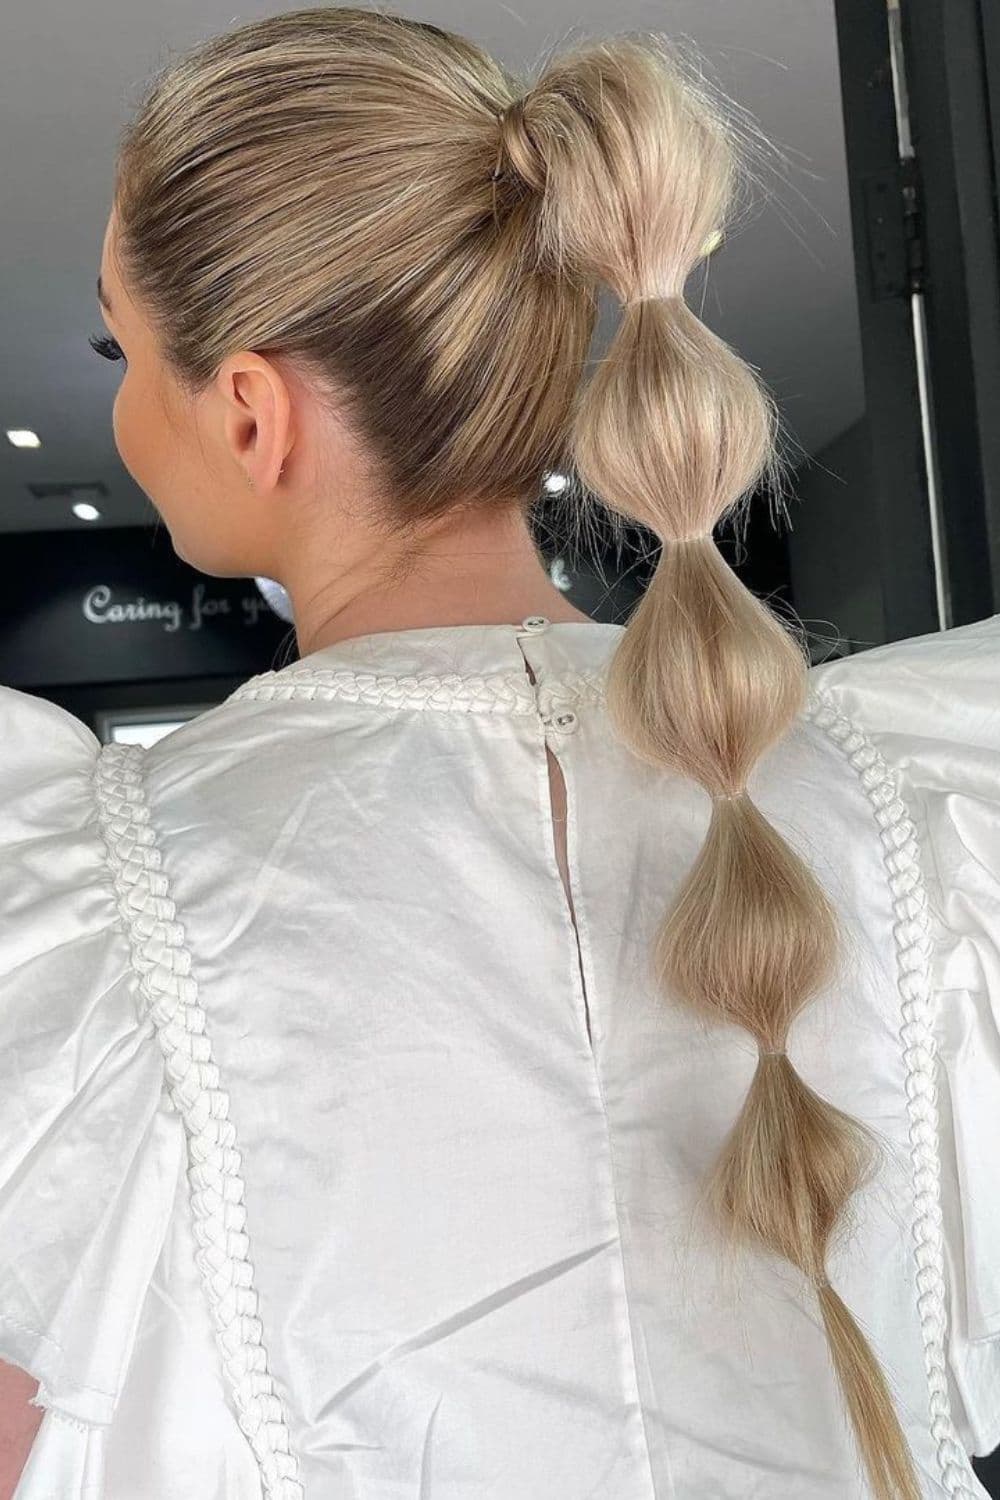 A woman with a blonde high bubble ponytail.